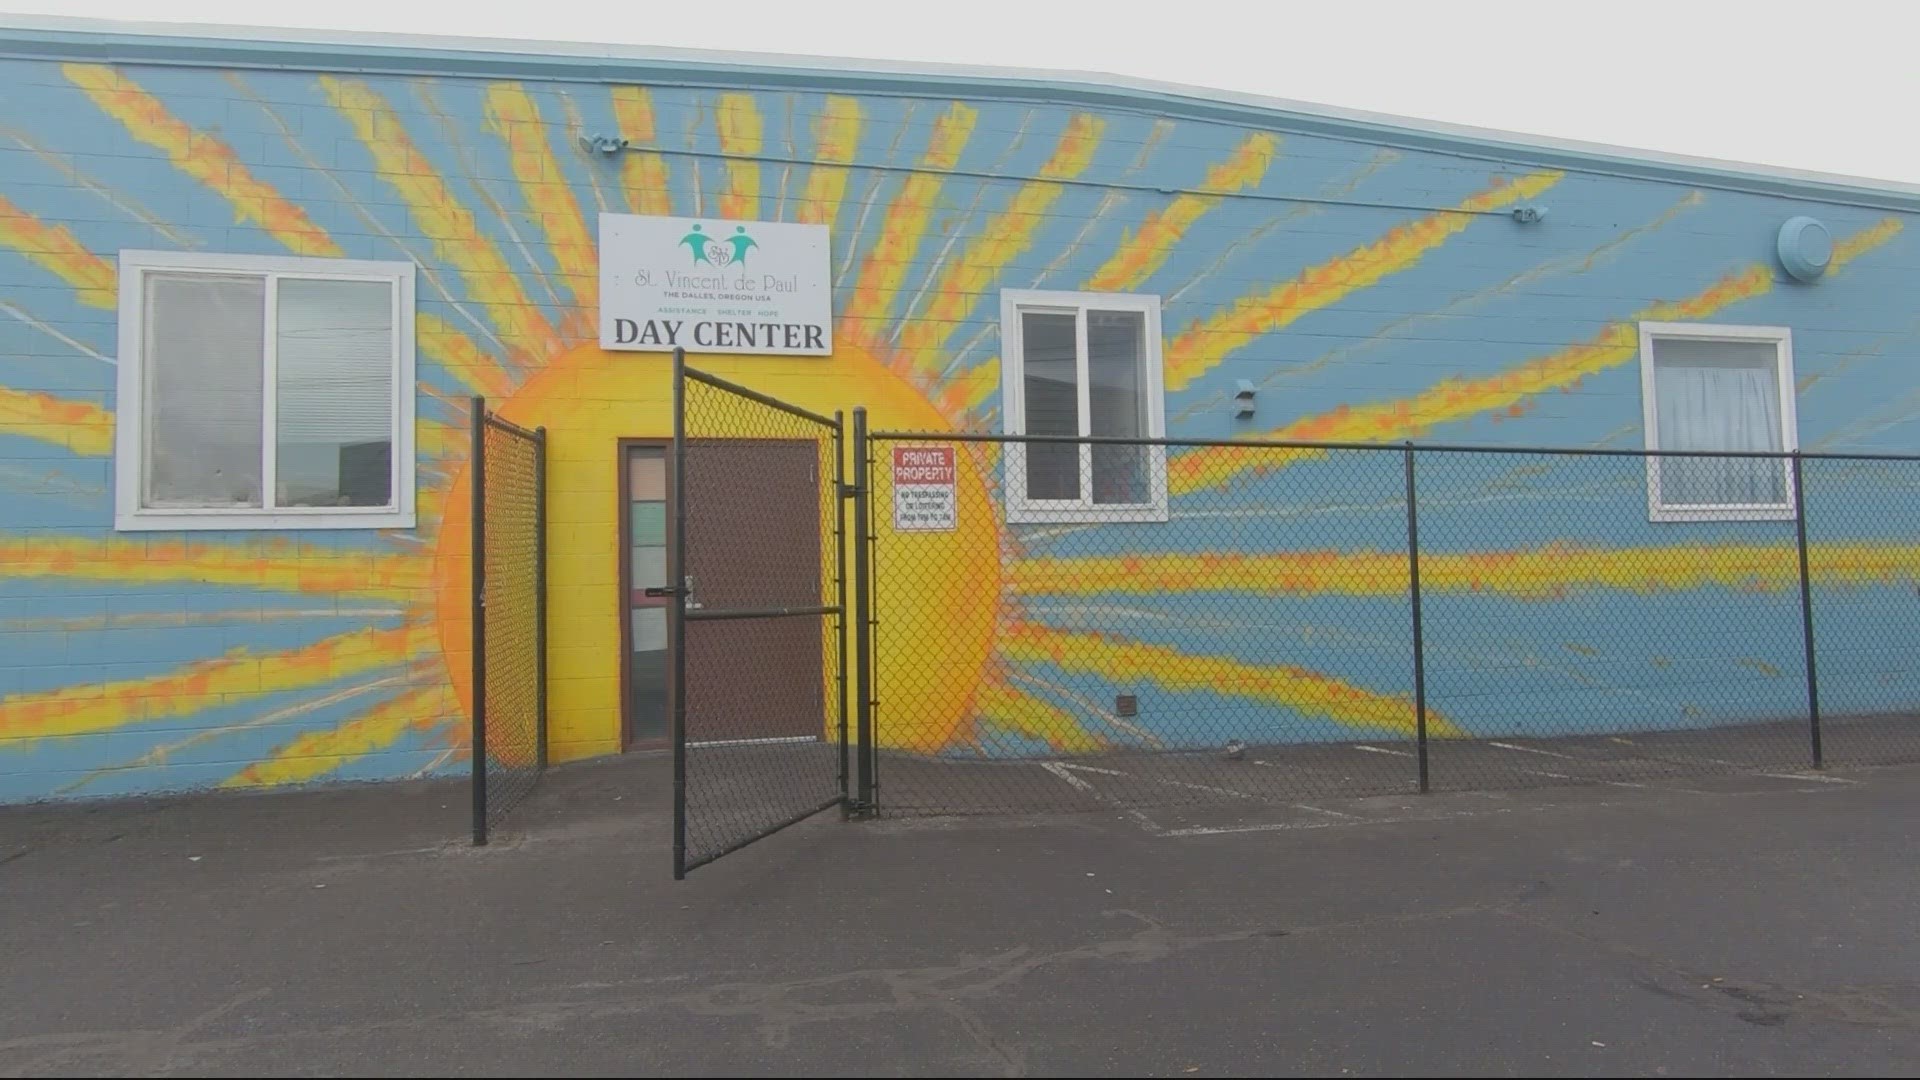 St. Vincent De Paul has decided to shut its doors after a battle with the city over multiple public nuisance violations due to people living in tents nearby.